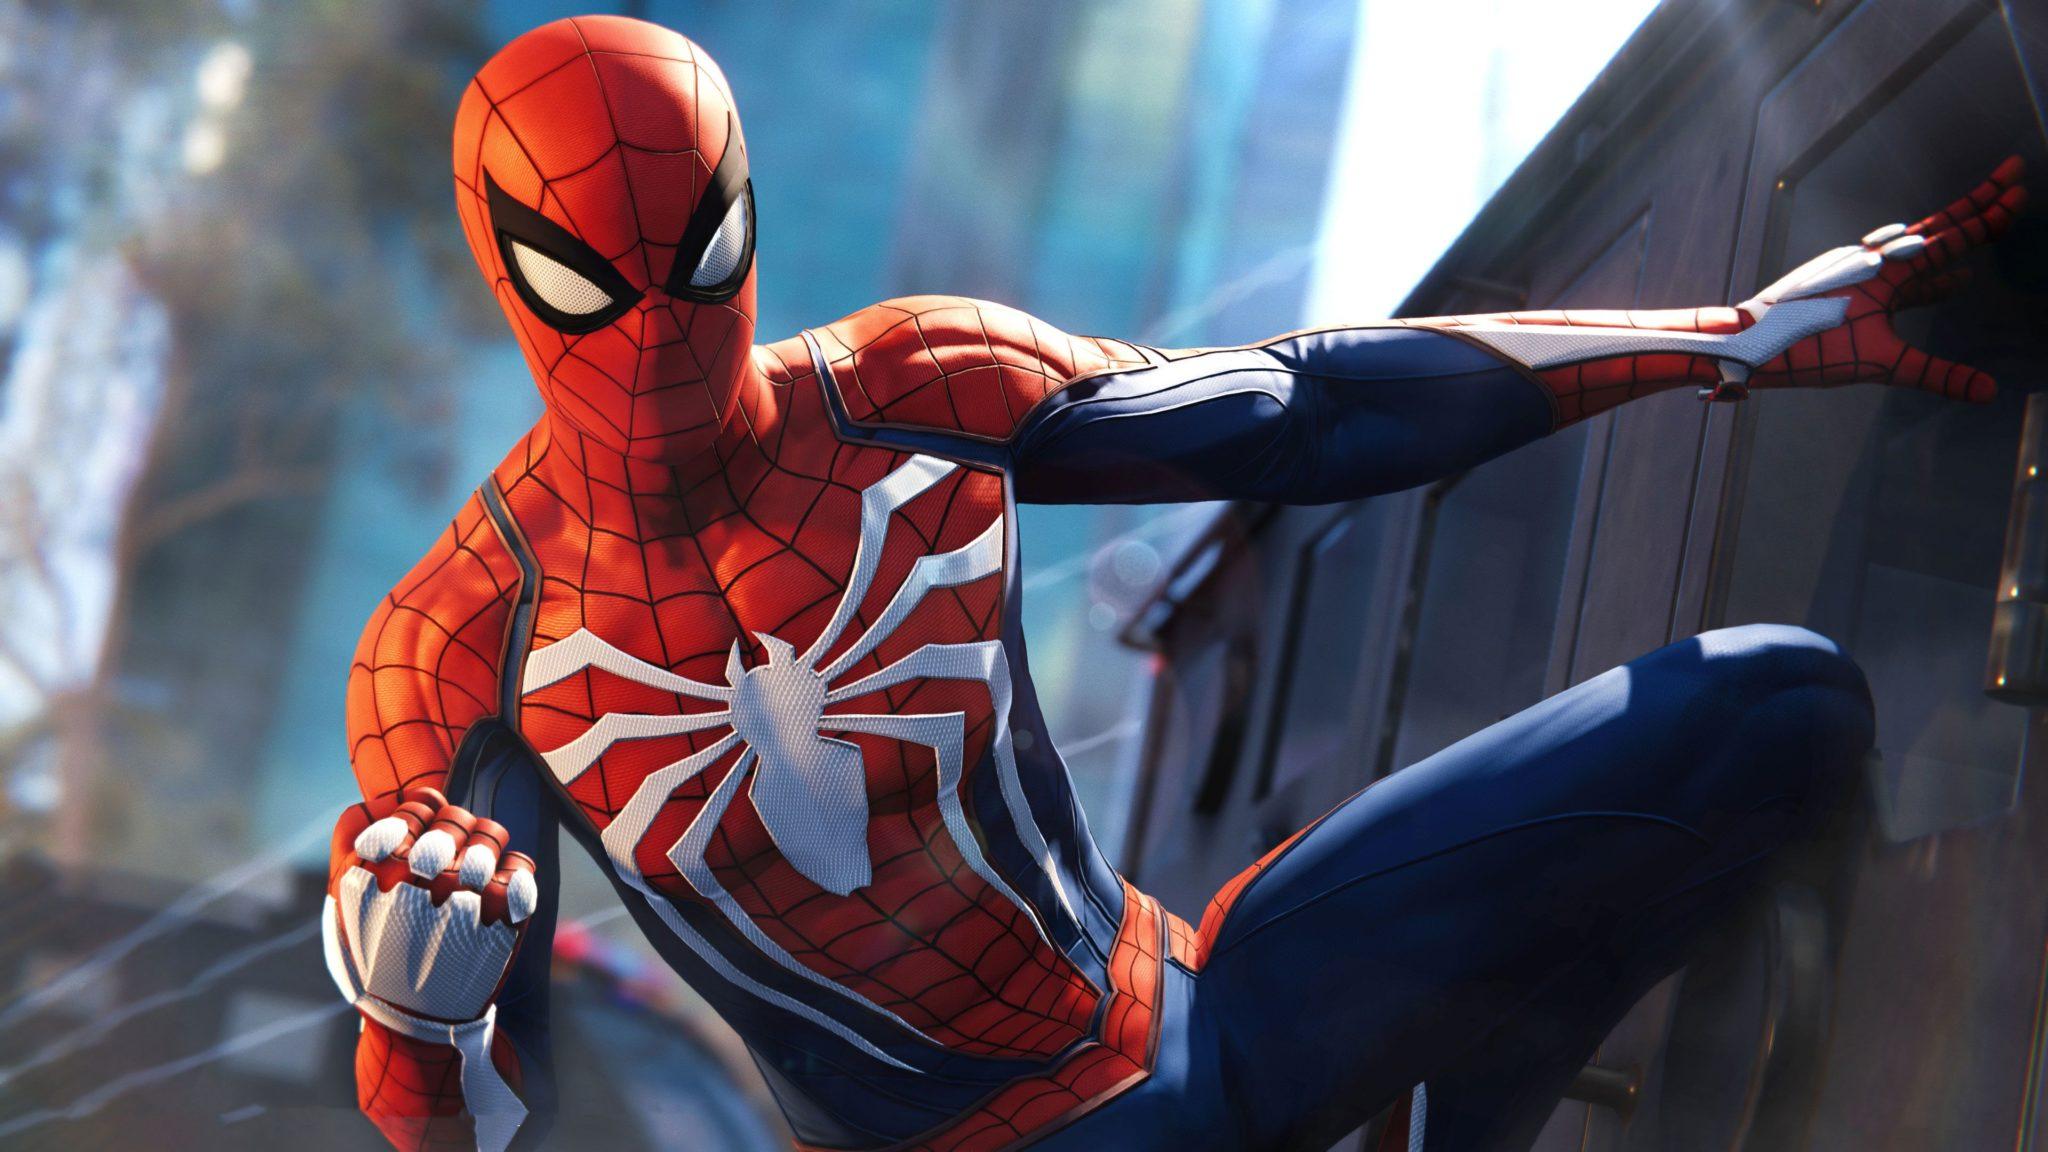 Spider-Man may well be the next Marvel hero to join the Fortnite roster.